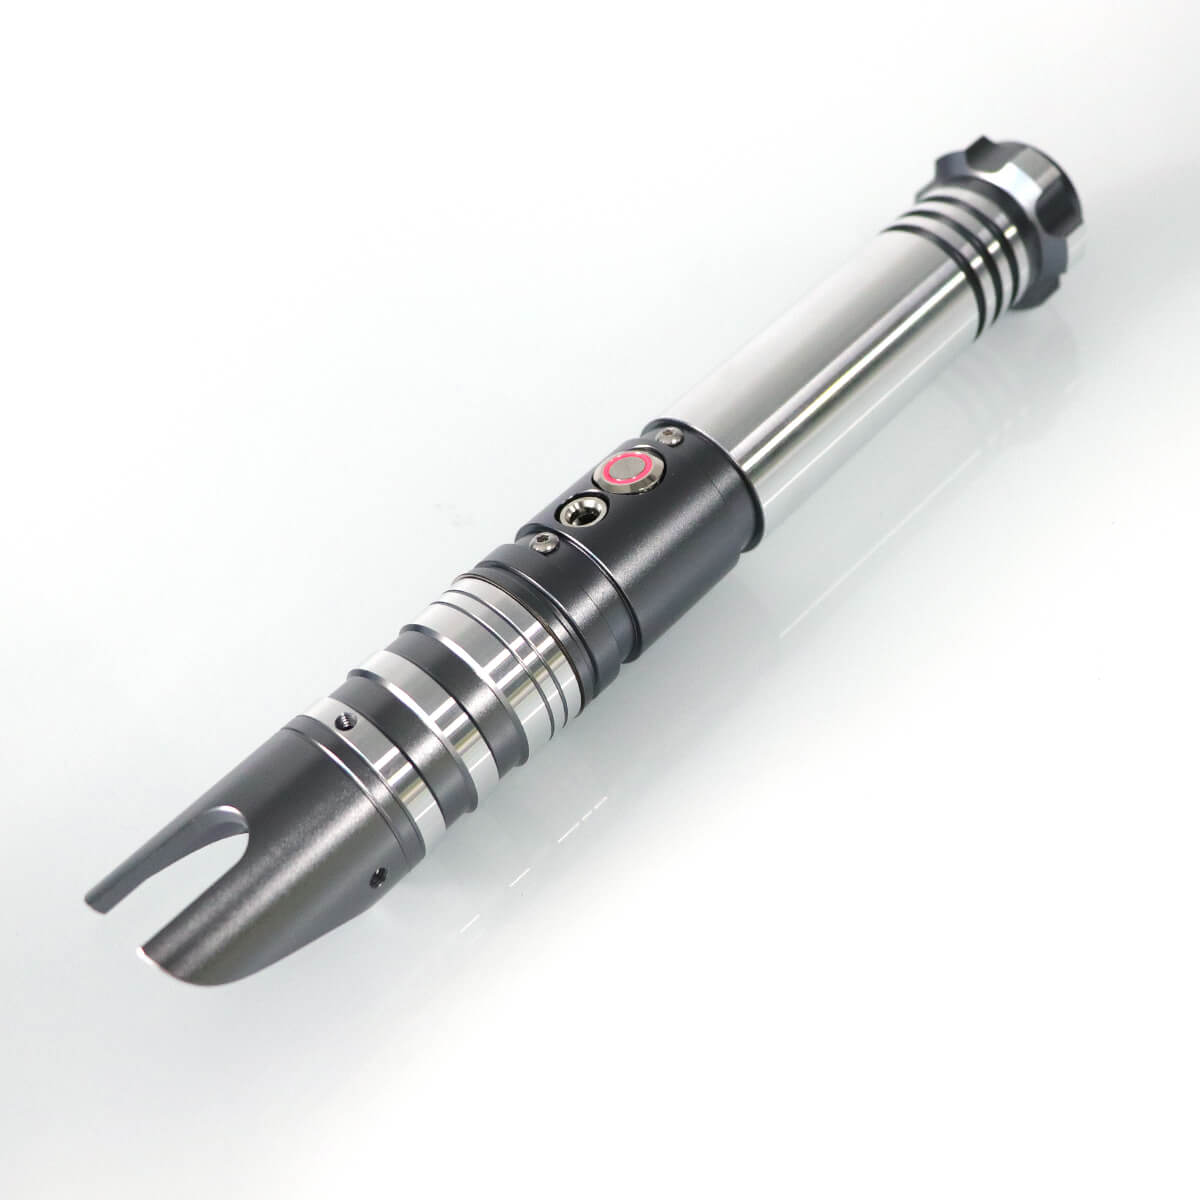 Amias Lightsaber - 1253 - isabers -